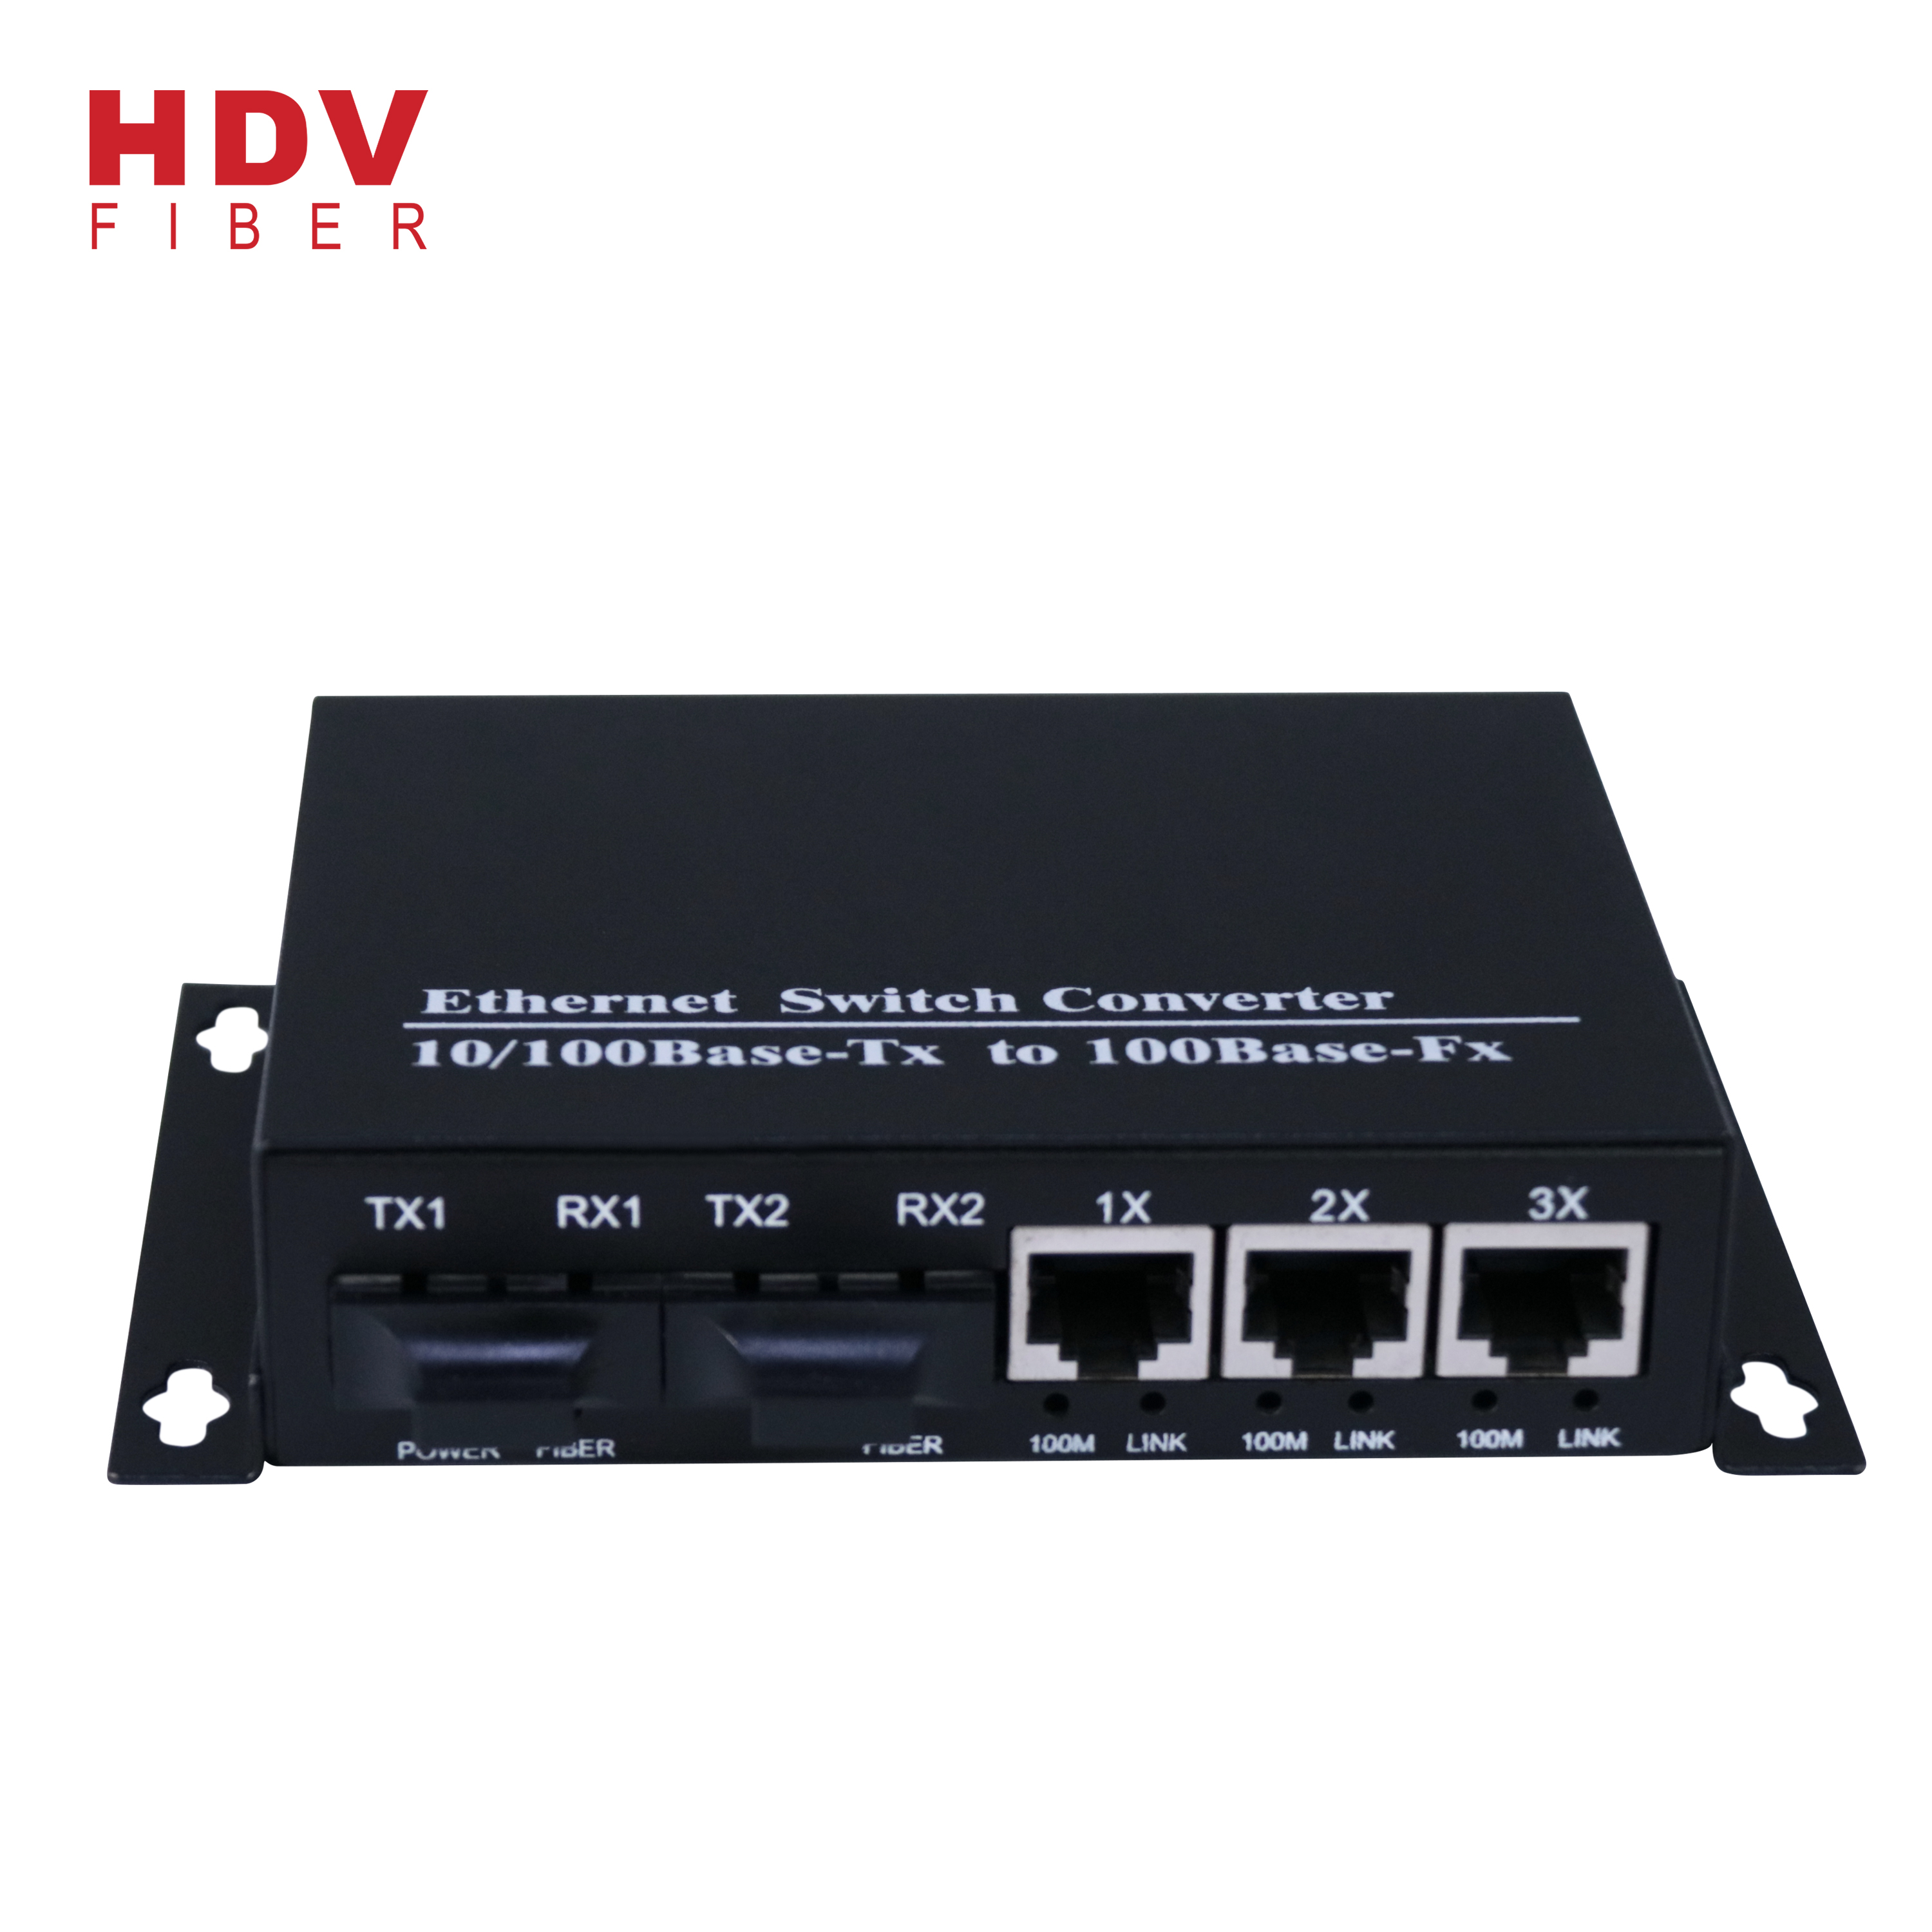 Wholesale Price China Wireless Ethernet Gateway – New Model Dual Fiber Compatible Huawei Industrial 3 Port Ethernet Switch – HDV